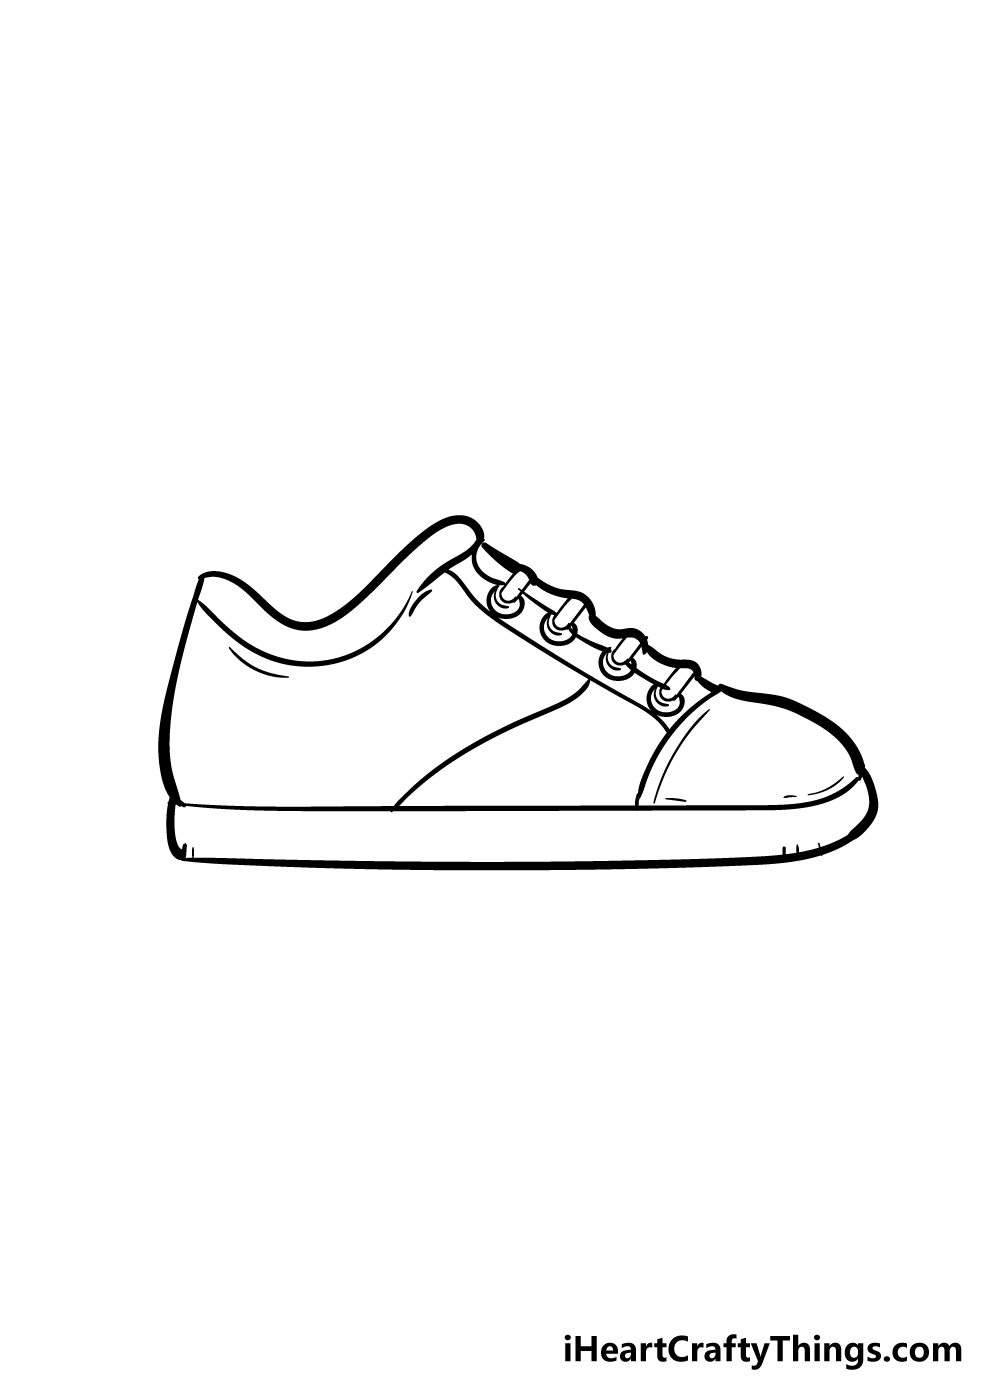 systematisk Løs øverst Shoe Drawing - How To Draw A Shoe Step By Step